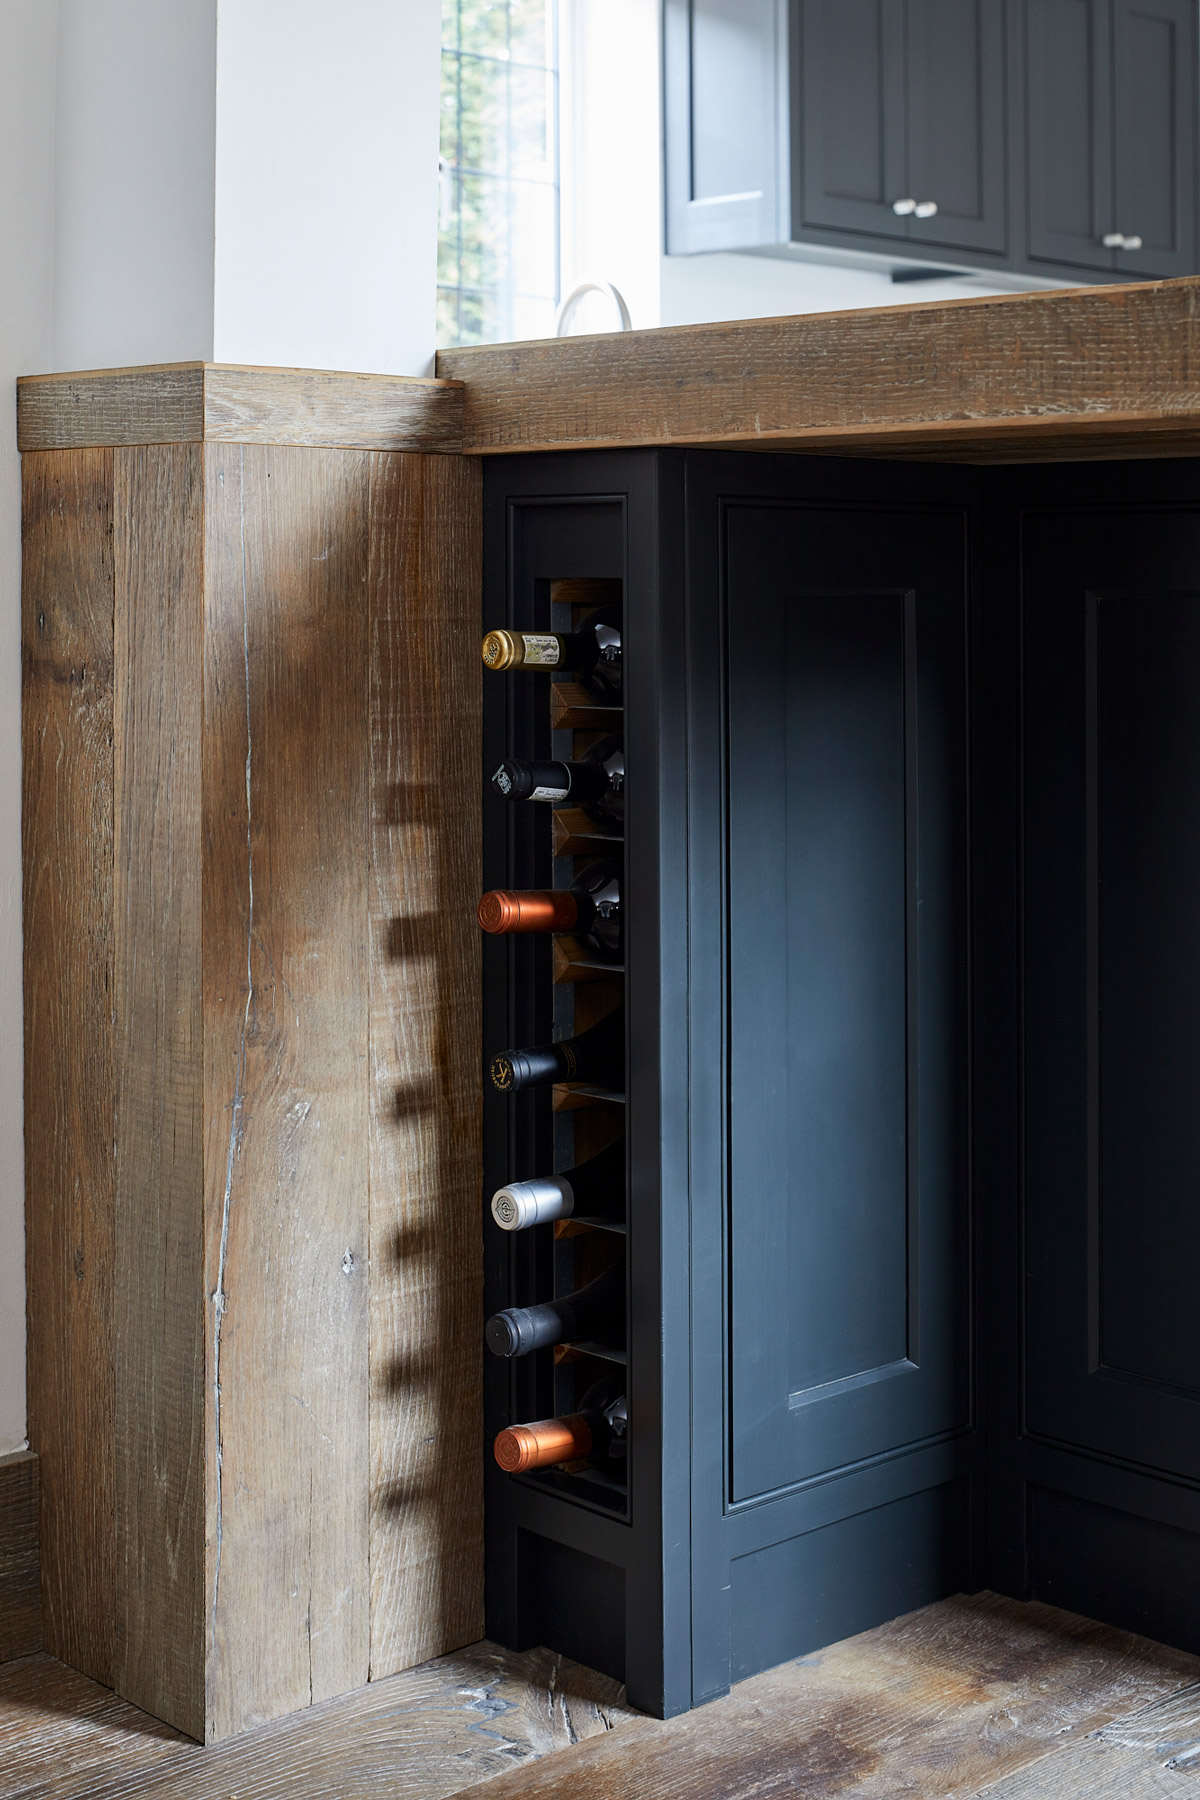 Slim kitchen wine rack in painted cabinets